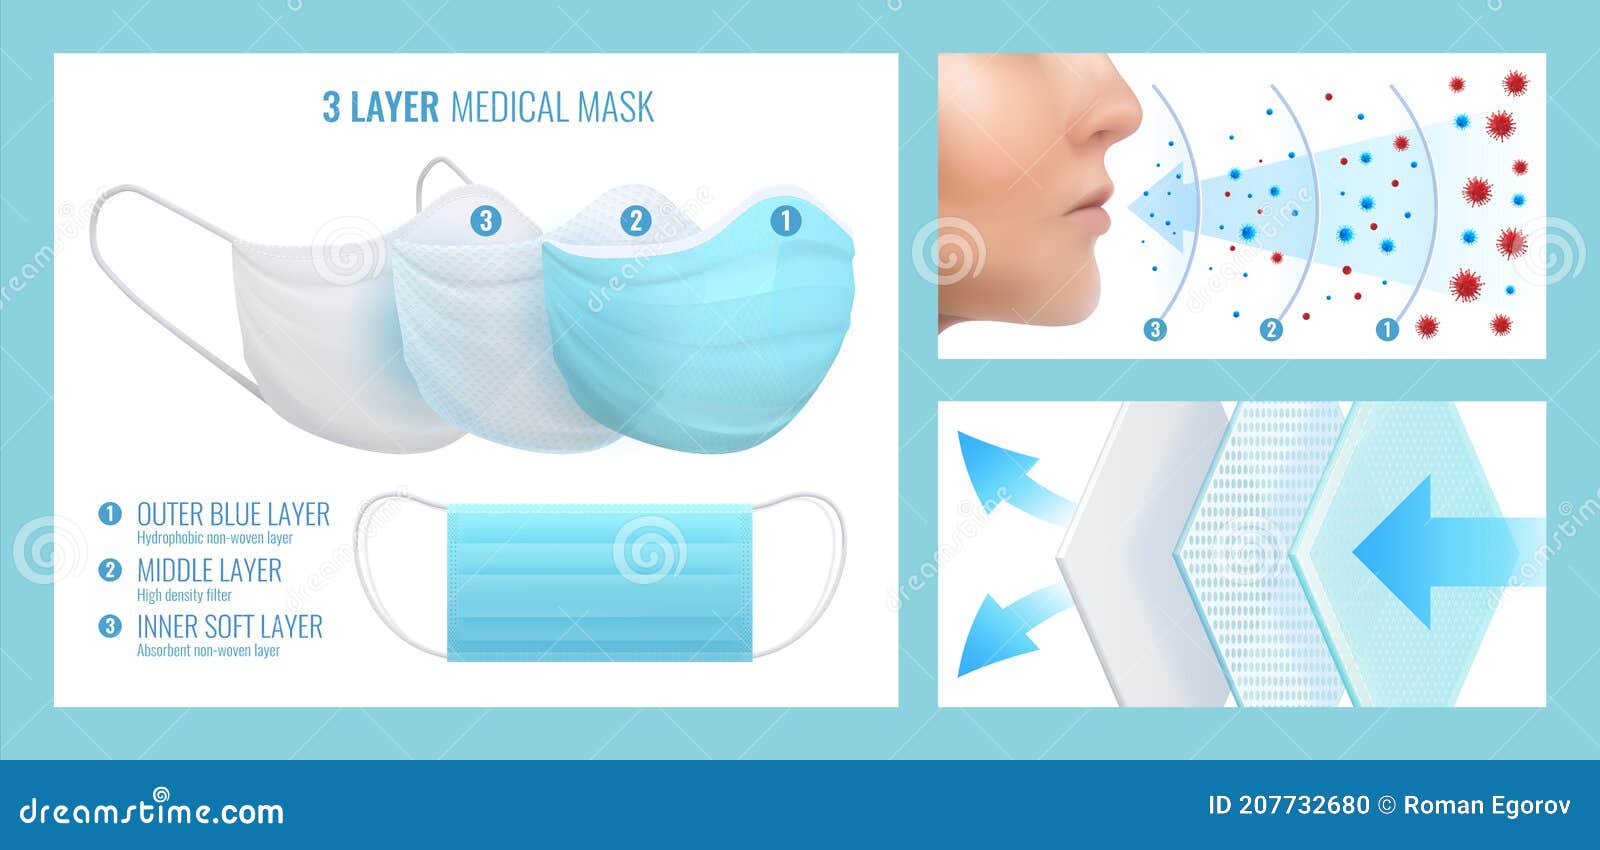 face mask layers. realistic disposable medical respirator. breathable protection multilayer filter cloth. contagious